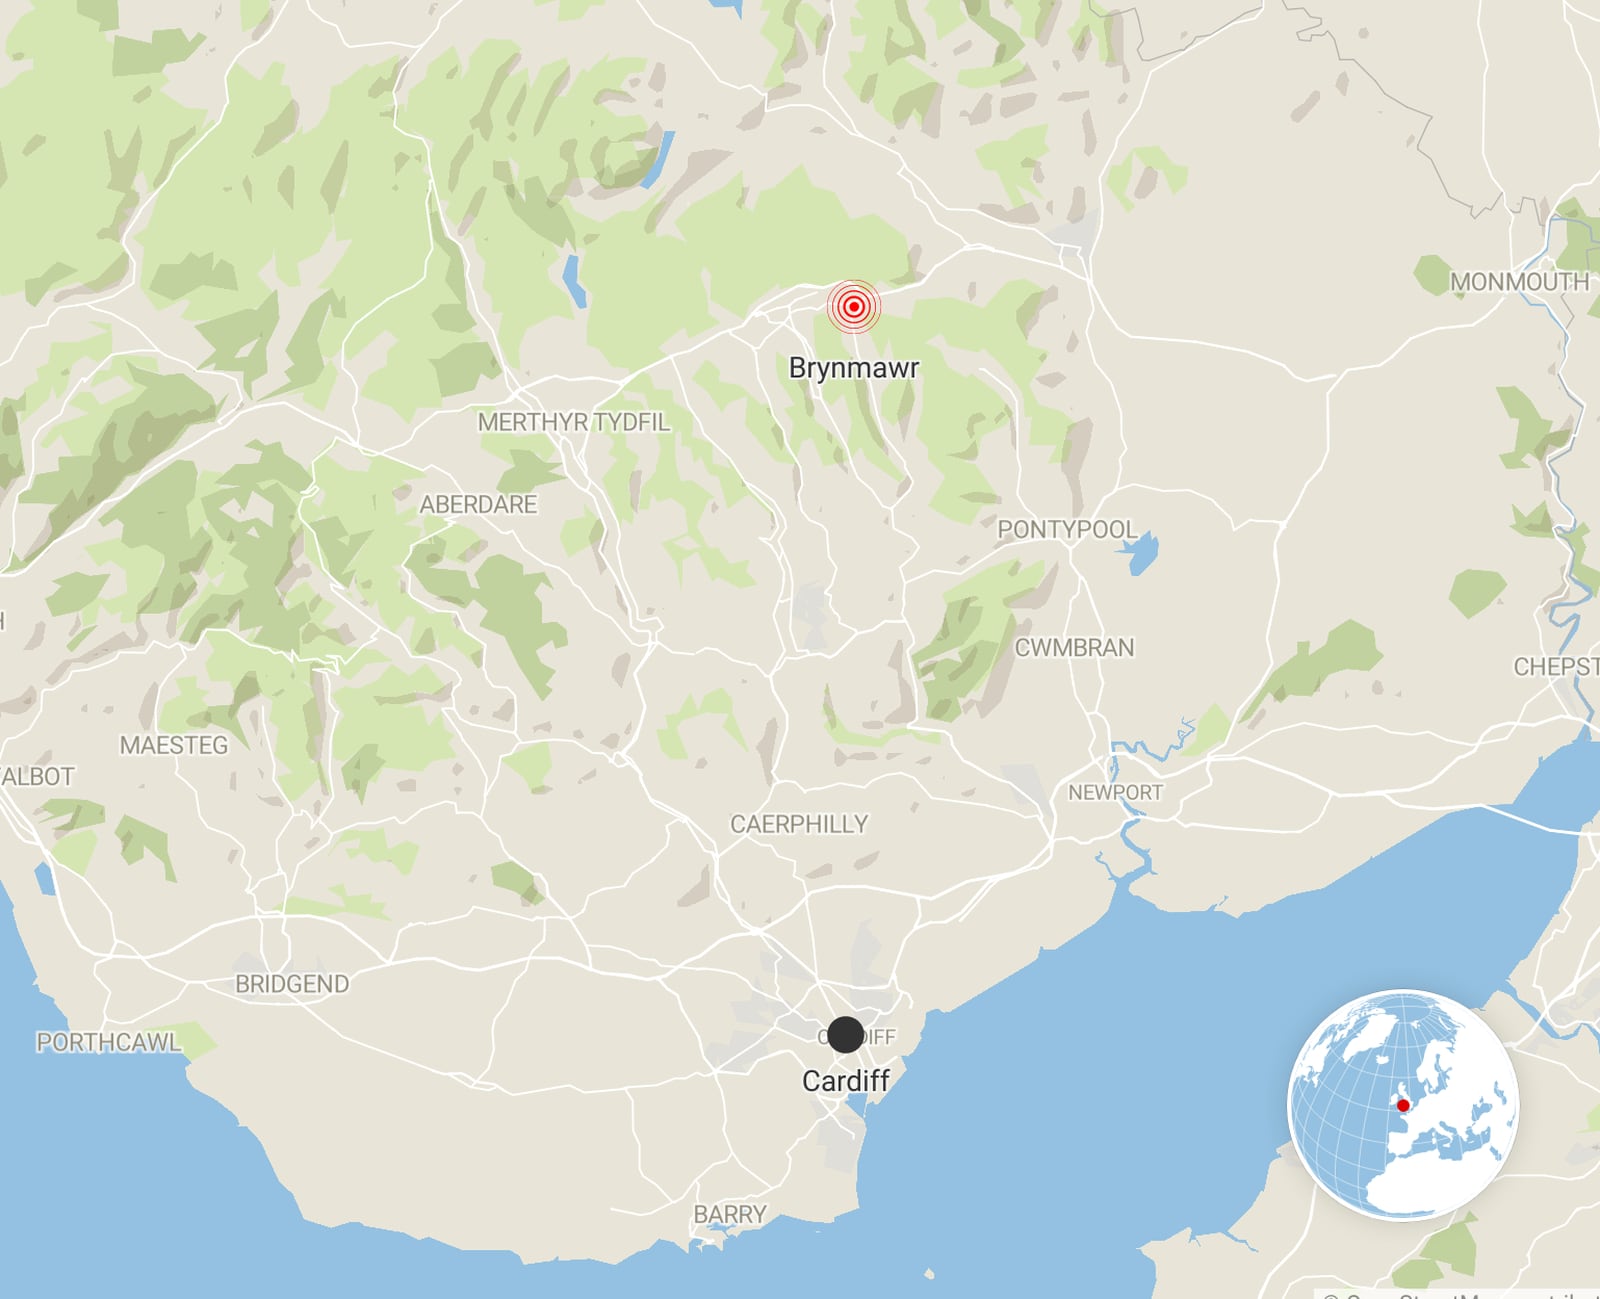 The earthquake's epicentre was Brynmawr in Blaenau Gwent – approximately 35km north of Cardiff, close to the Brecon Beacons National Park.